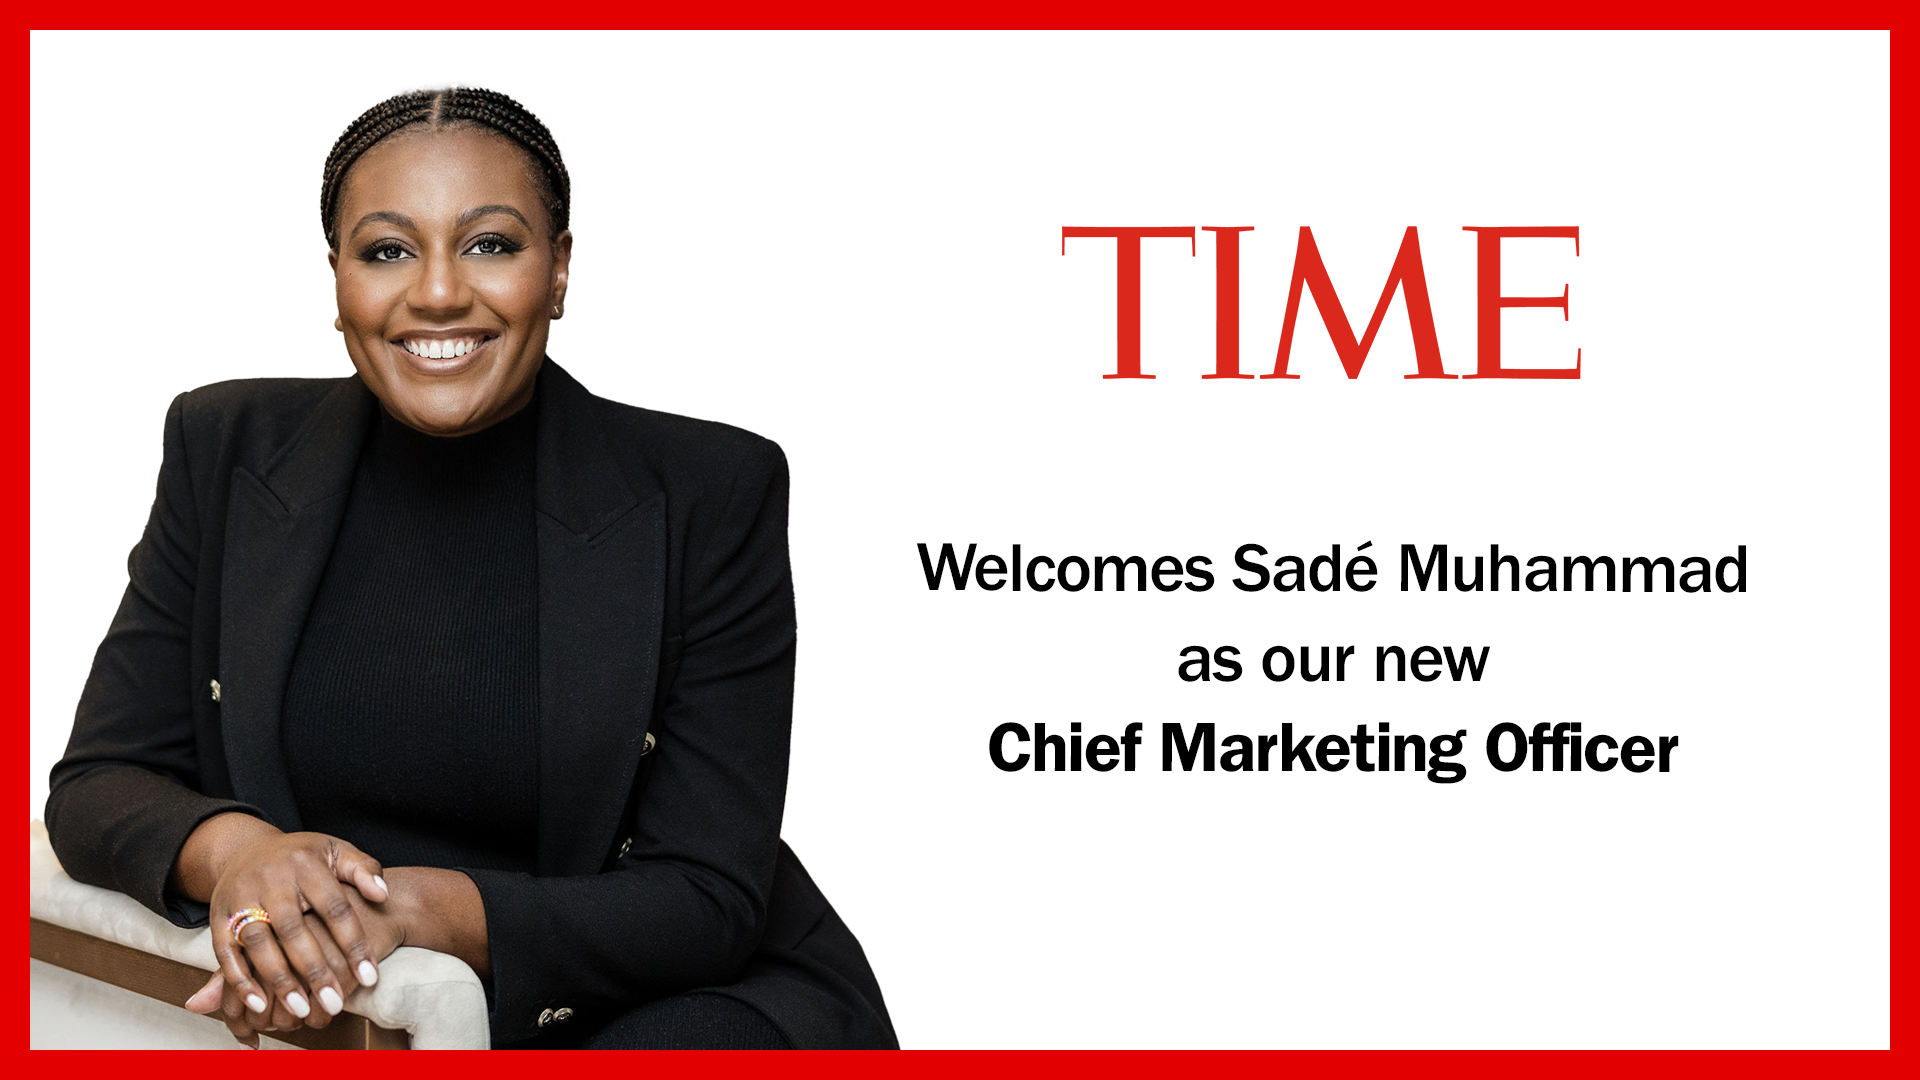 TIME Welcomes Sade Muhammad as new Chief Marketing Officer